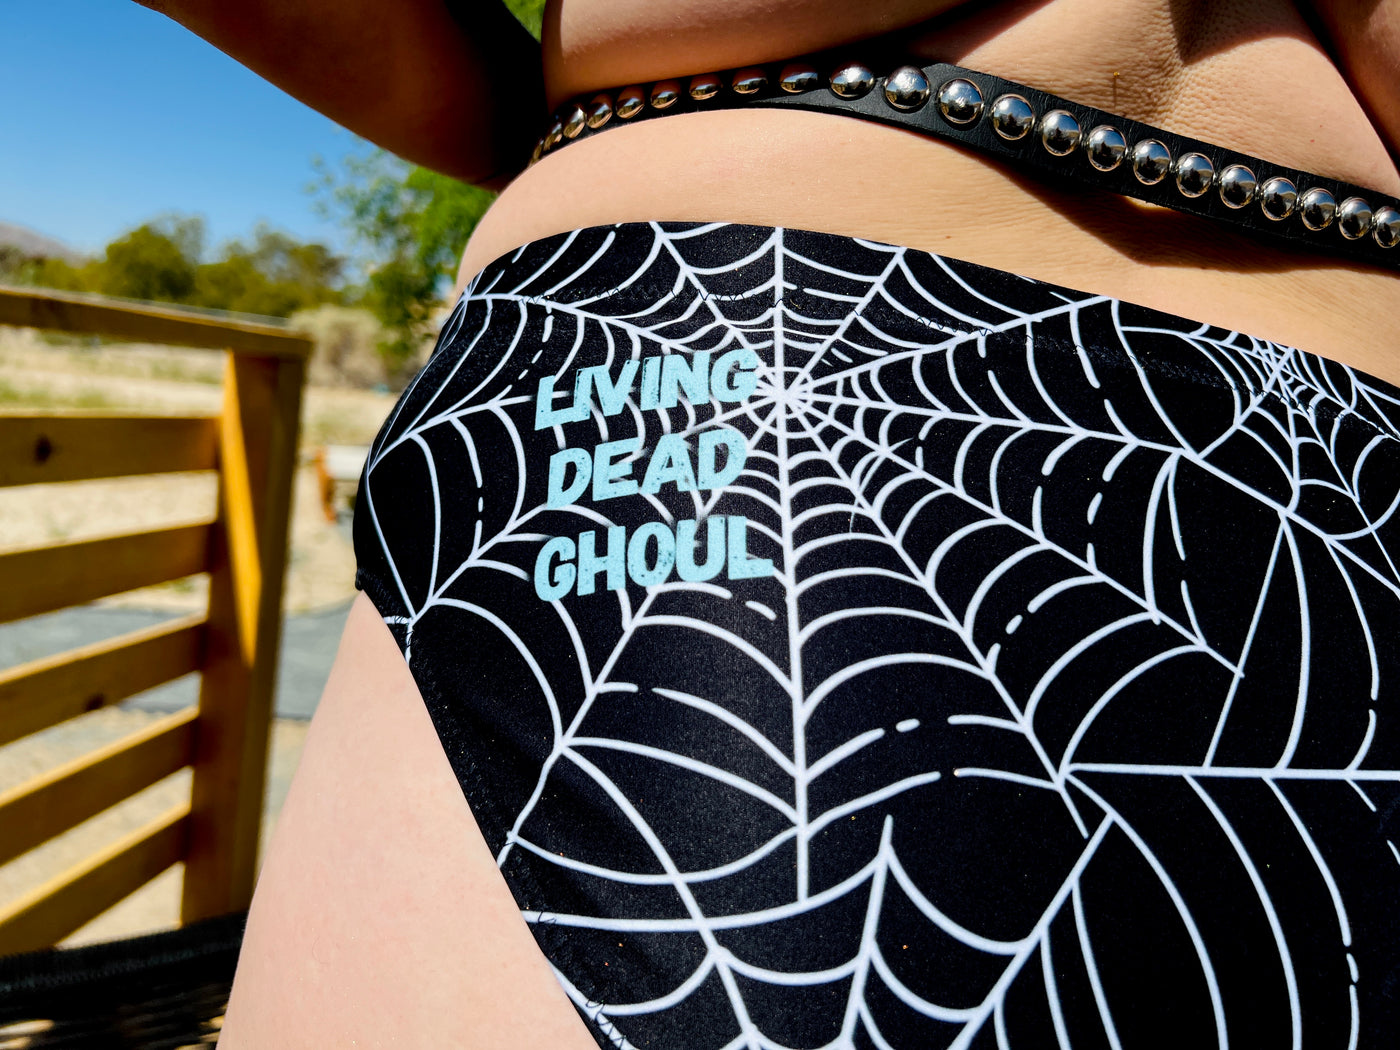 Living Dead Ghoul Two-Piece Swimsuit